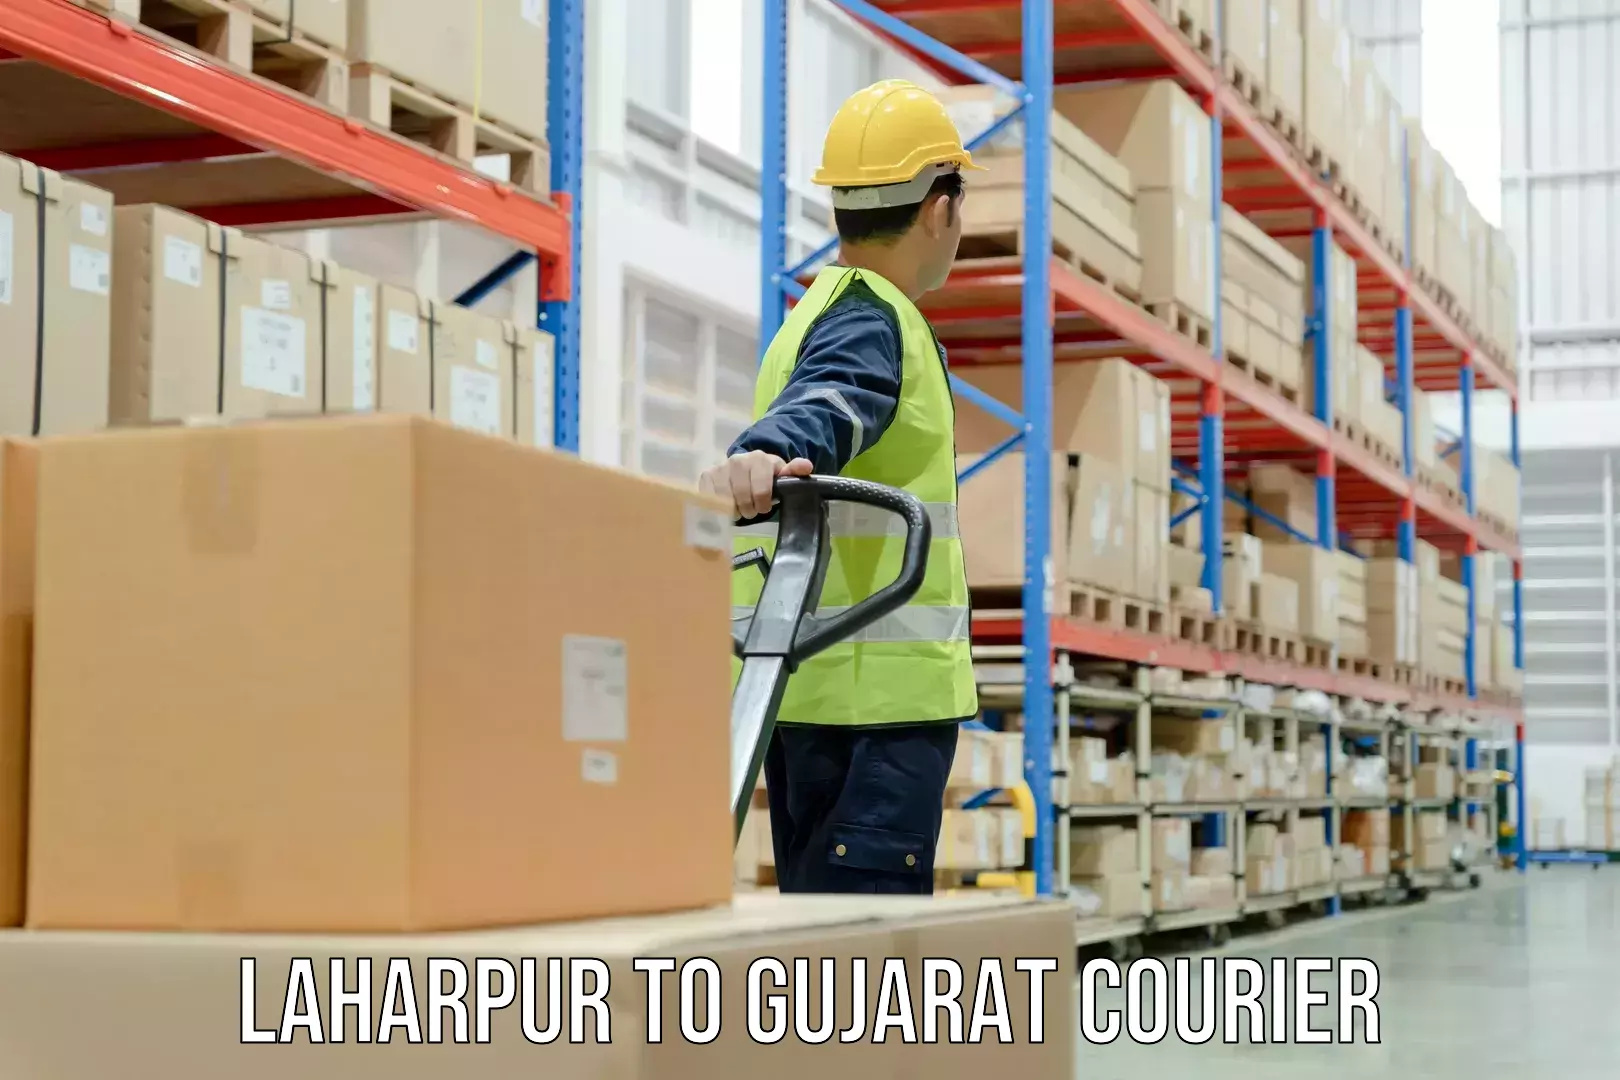 Full-service courier options Laharpur to Gujarat